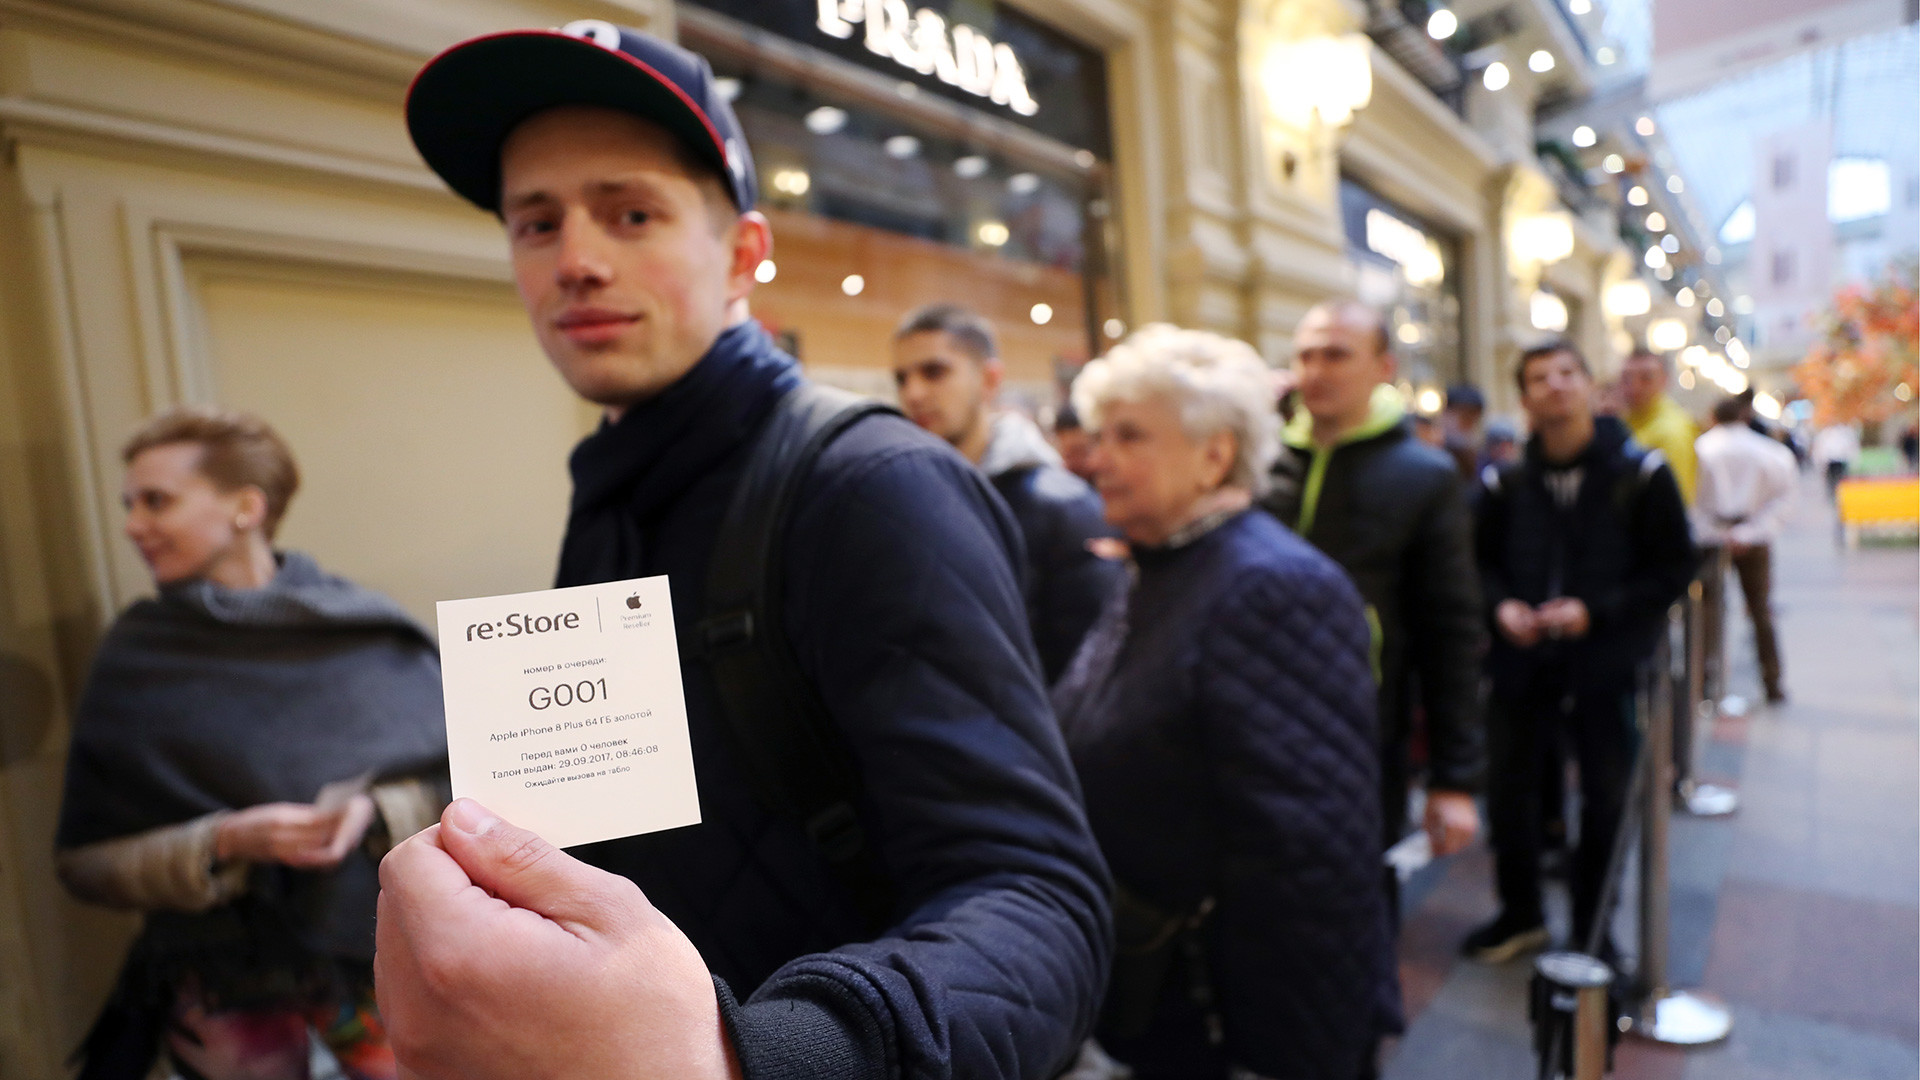 People wait in line inside the GUM department store to buy new iPhone 8 and iPhone 8 Plus as Apple's latest smartphones officially go on sale in Russia.